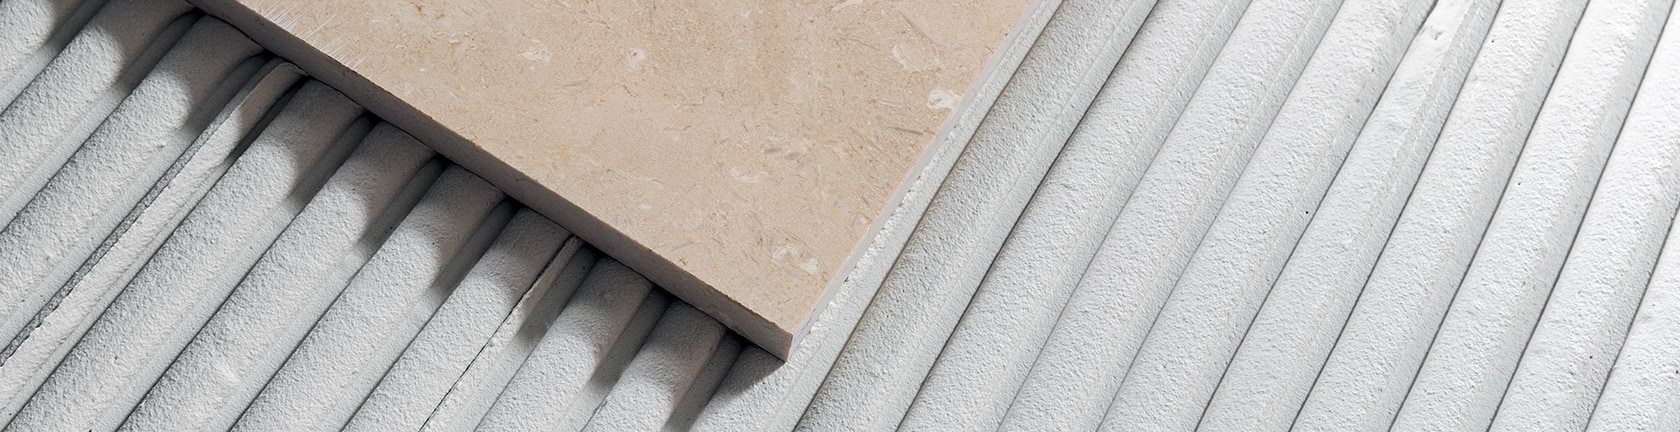 From natural stone to ceramic tiles: the aim is to be quick